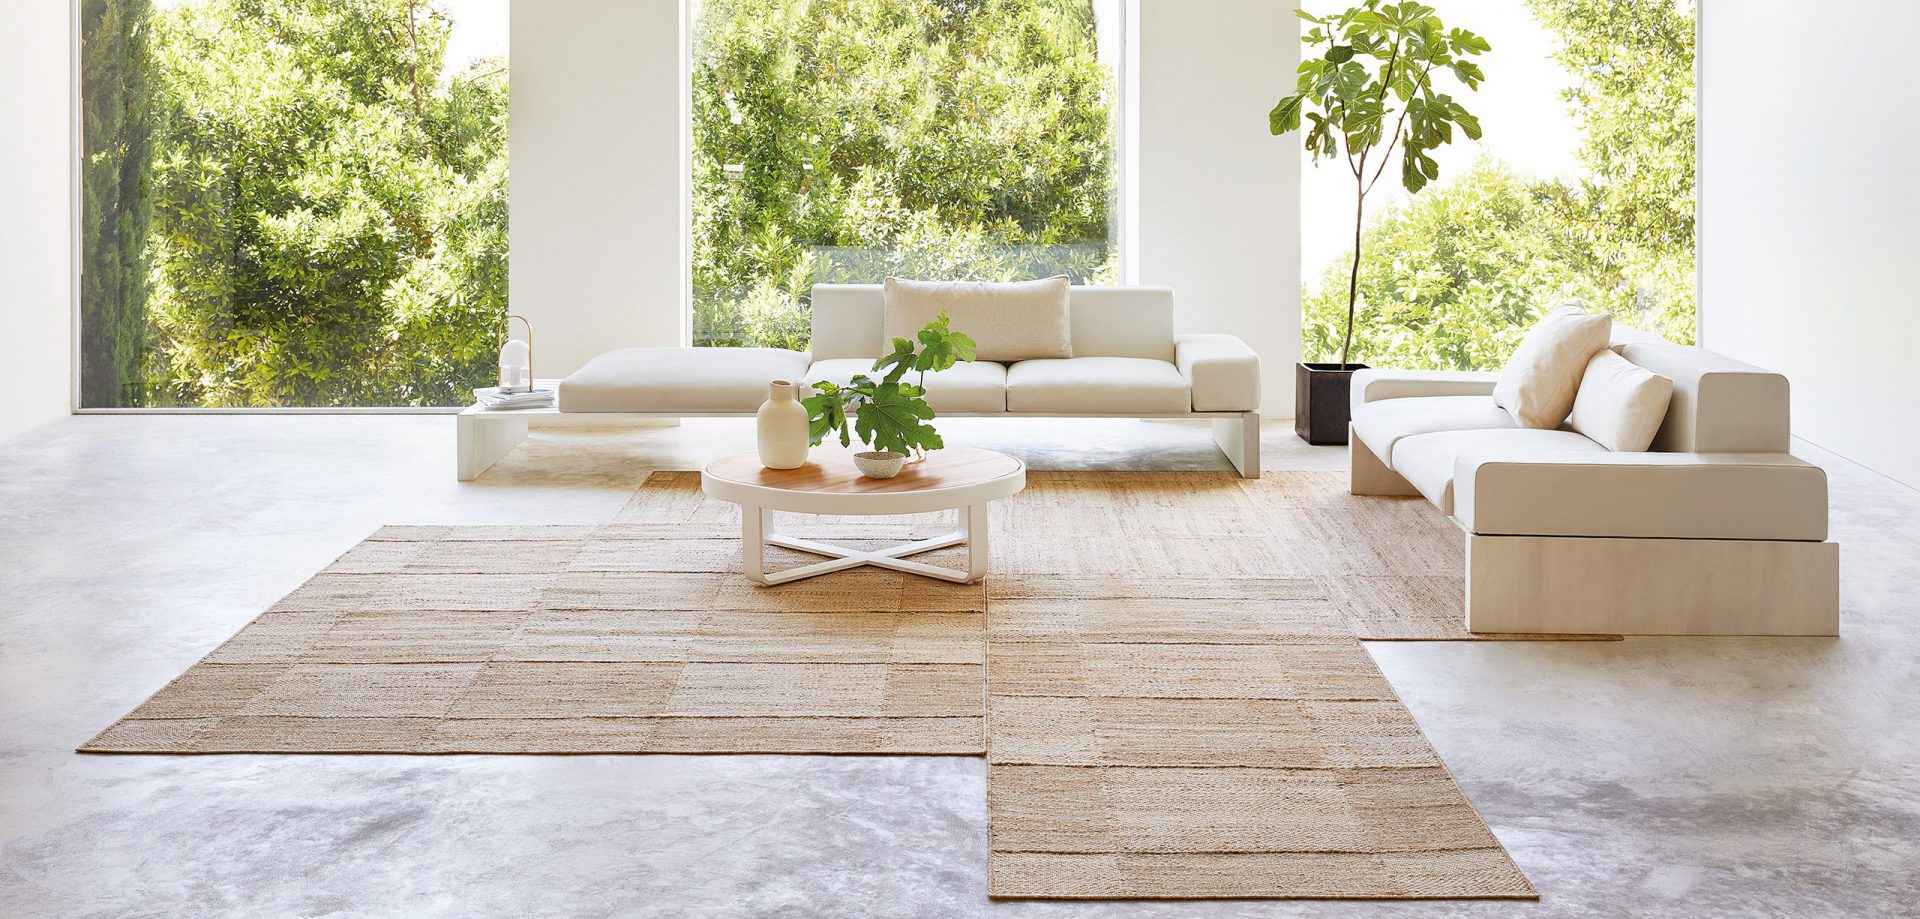 ROOTS RUG